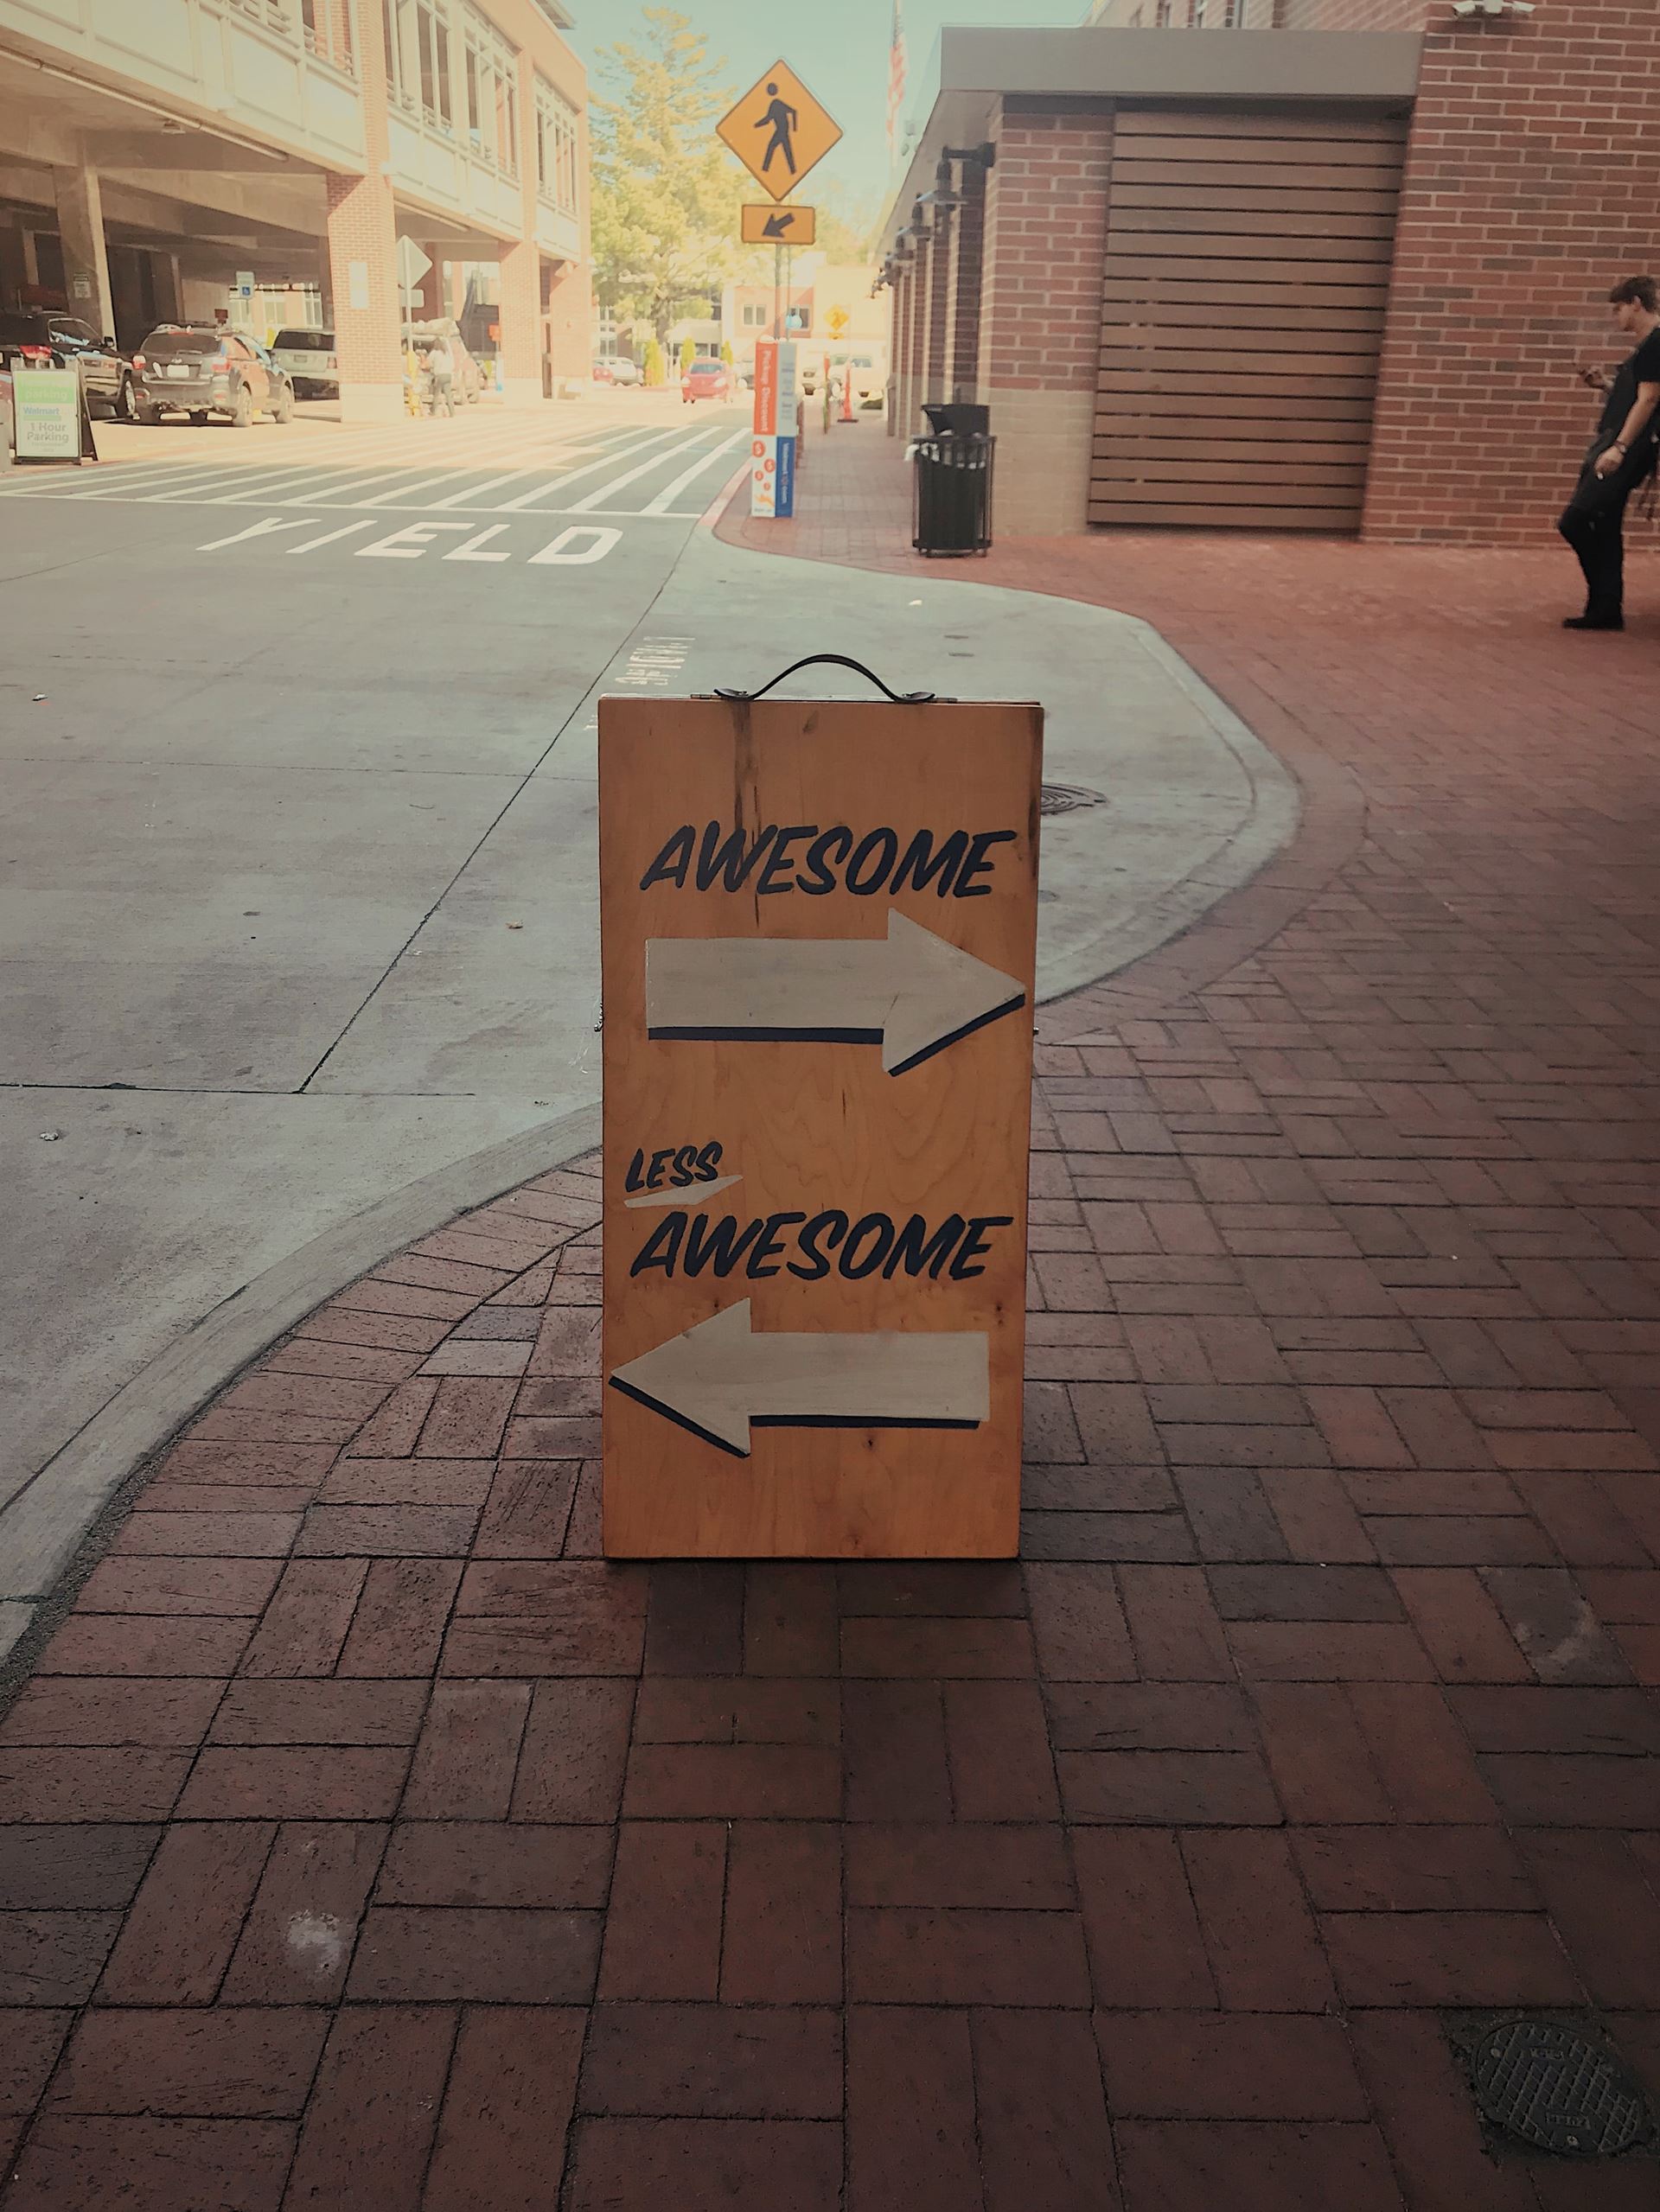 a frame signpost saying awesome and less awesome